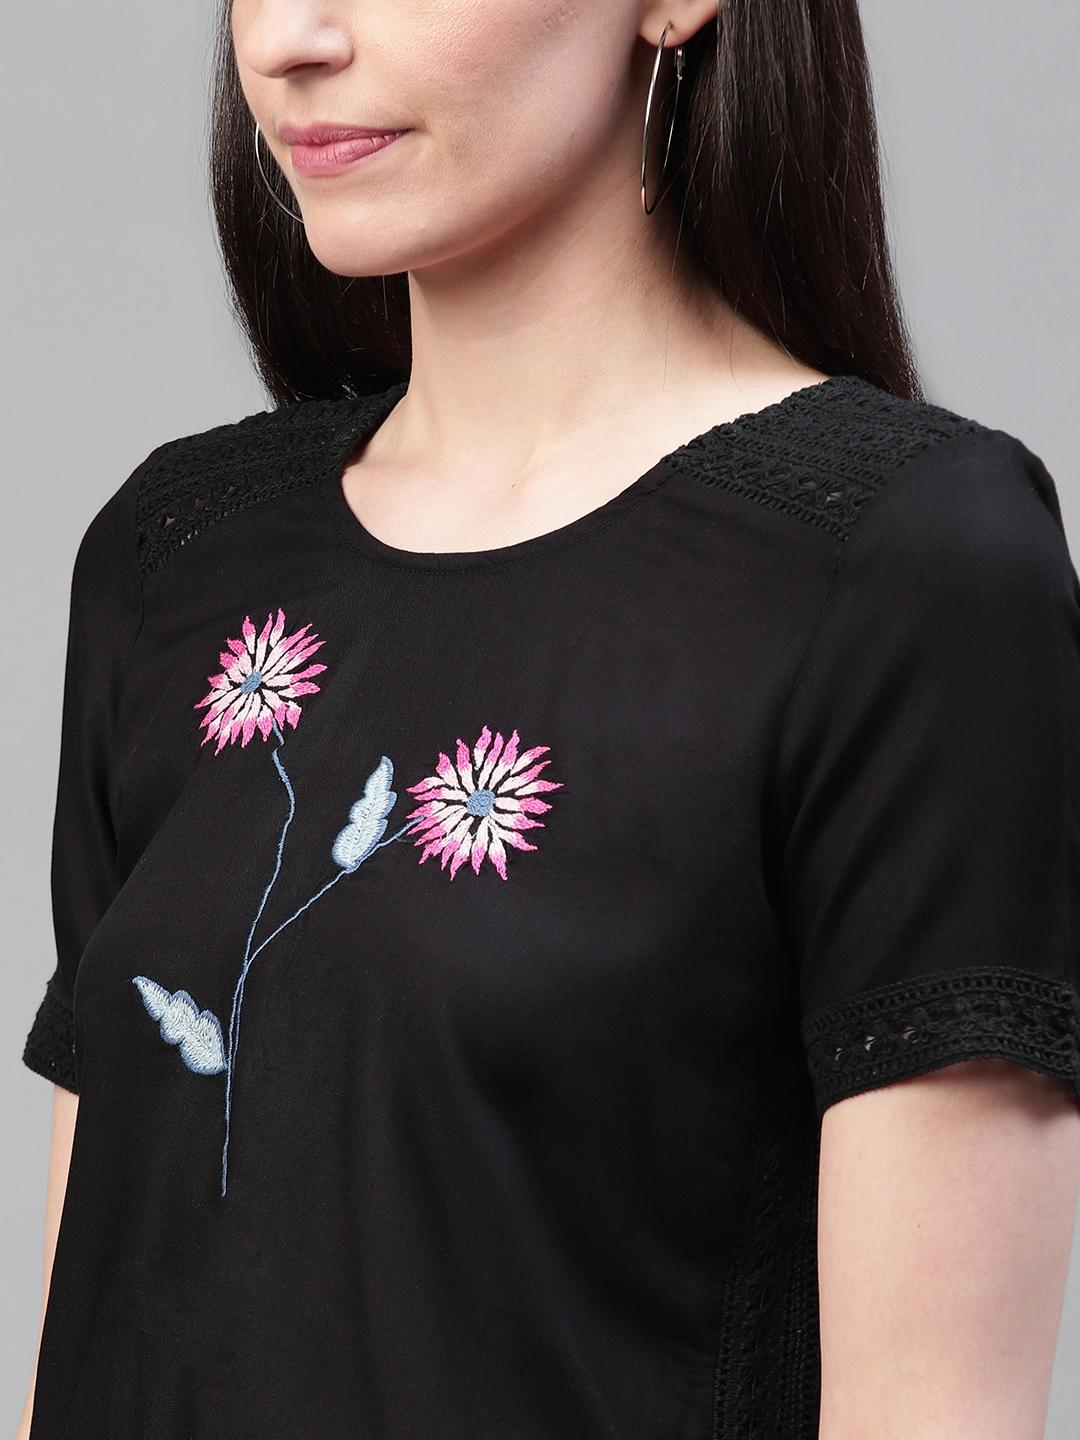 Black & Pink Floral Embroidery Top